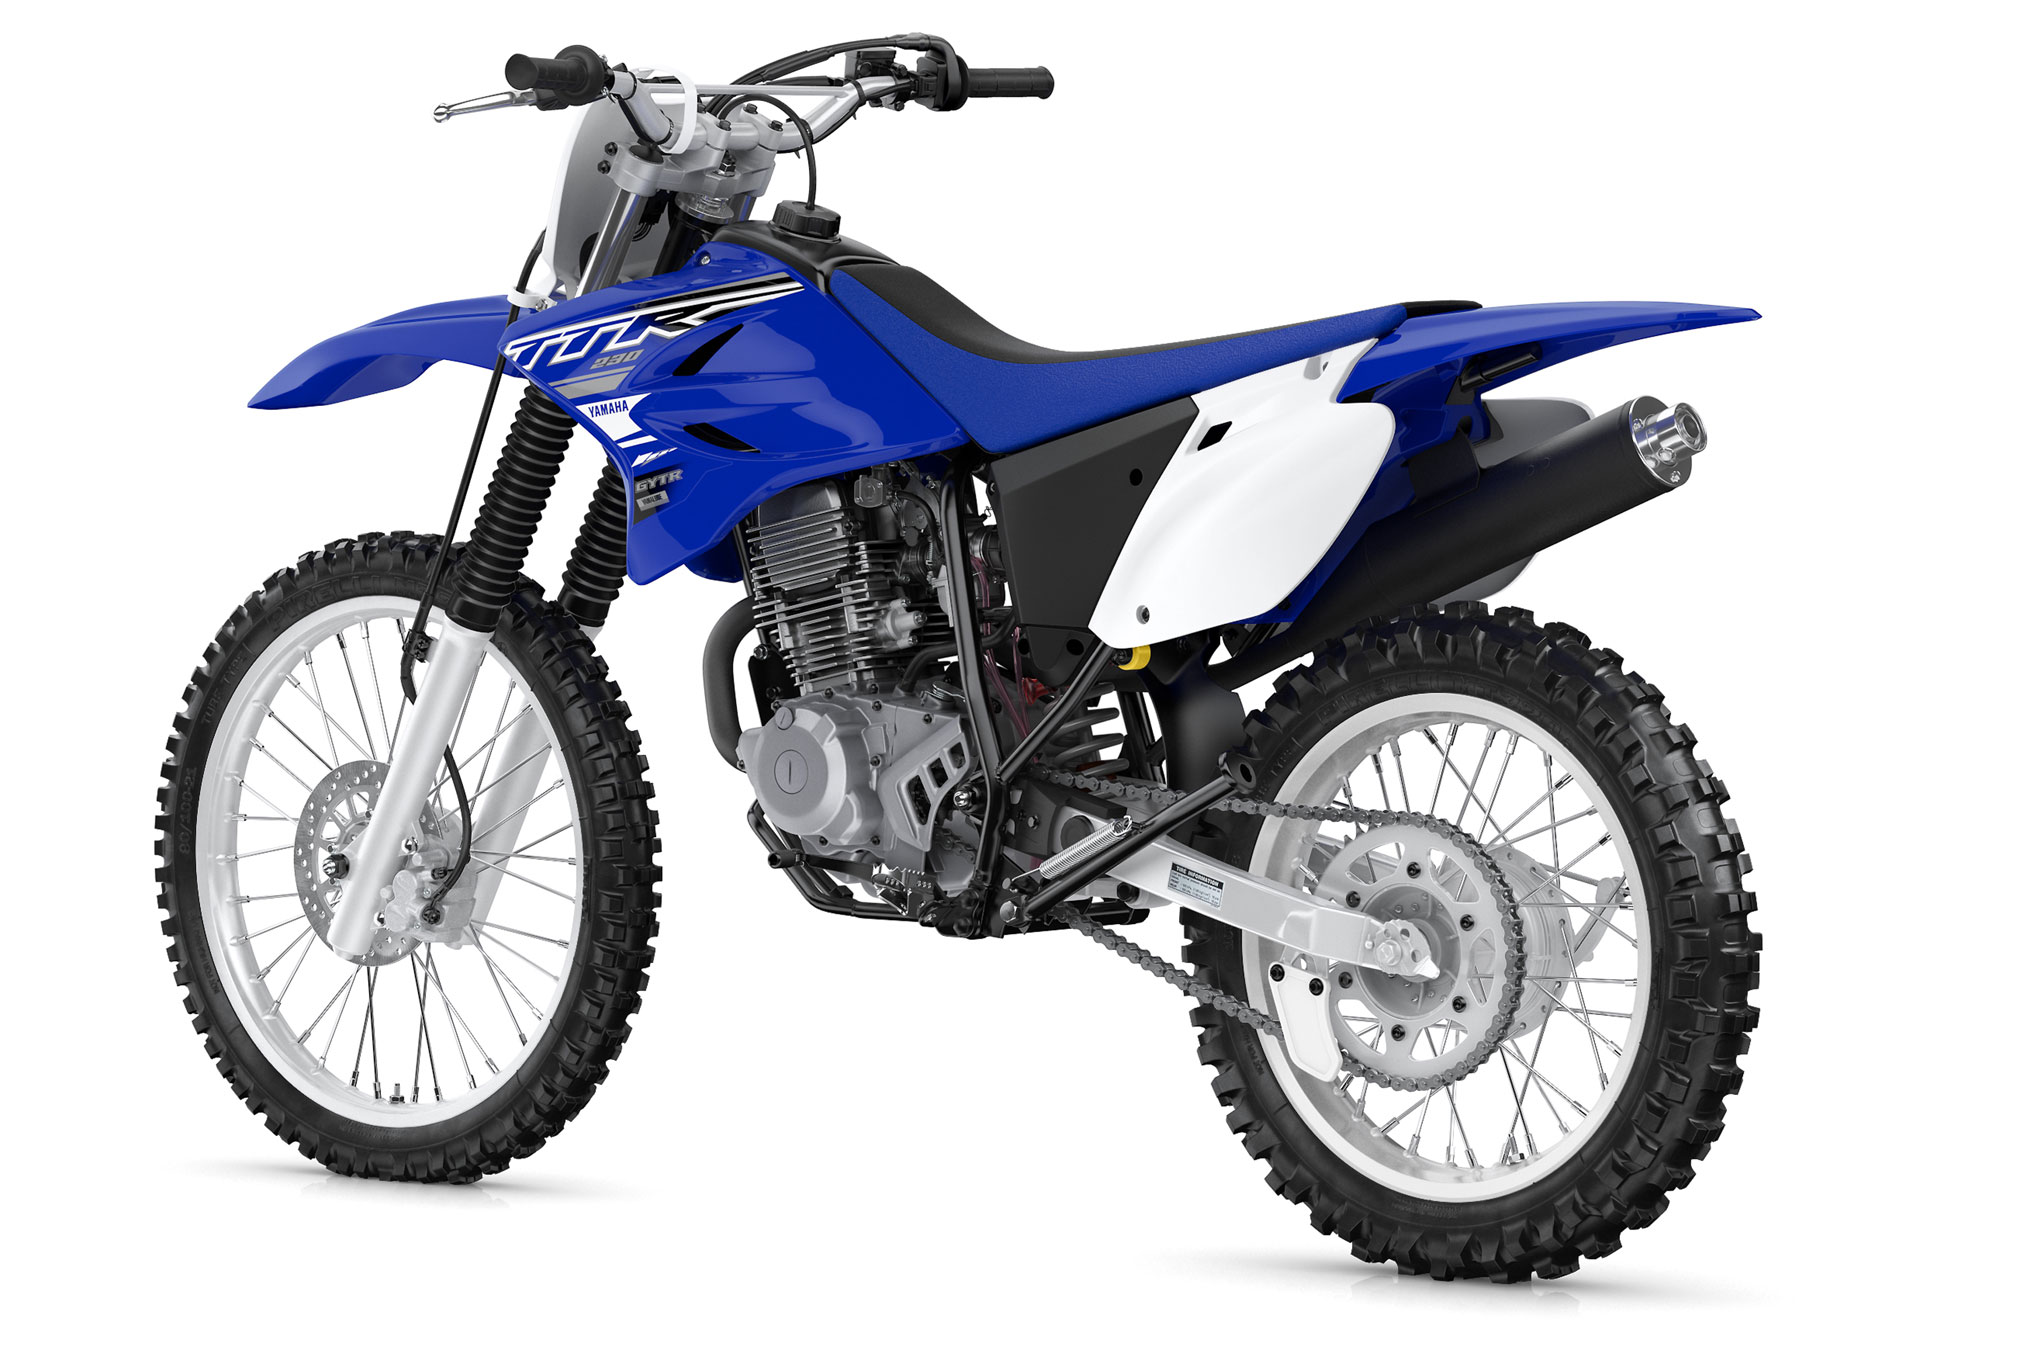 2019 Yamaha TTR230 Guide • Total Motorcycle